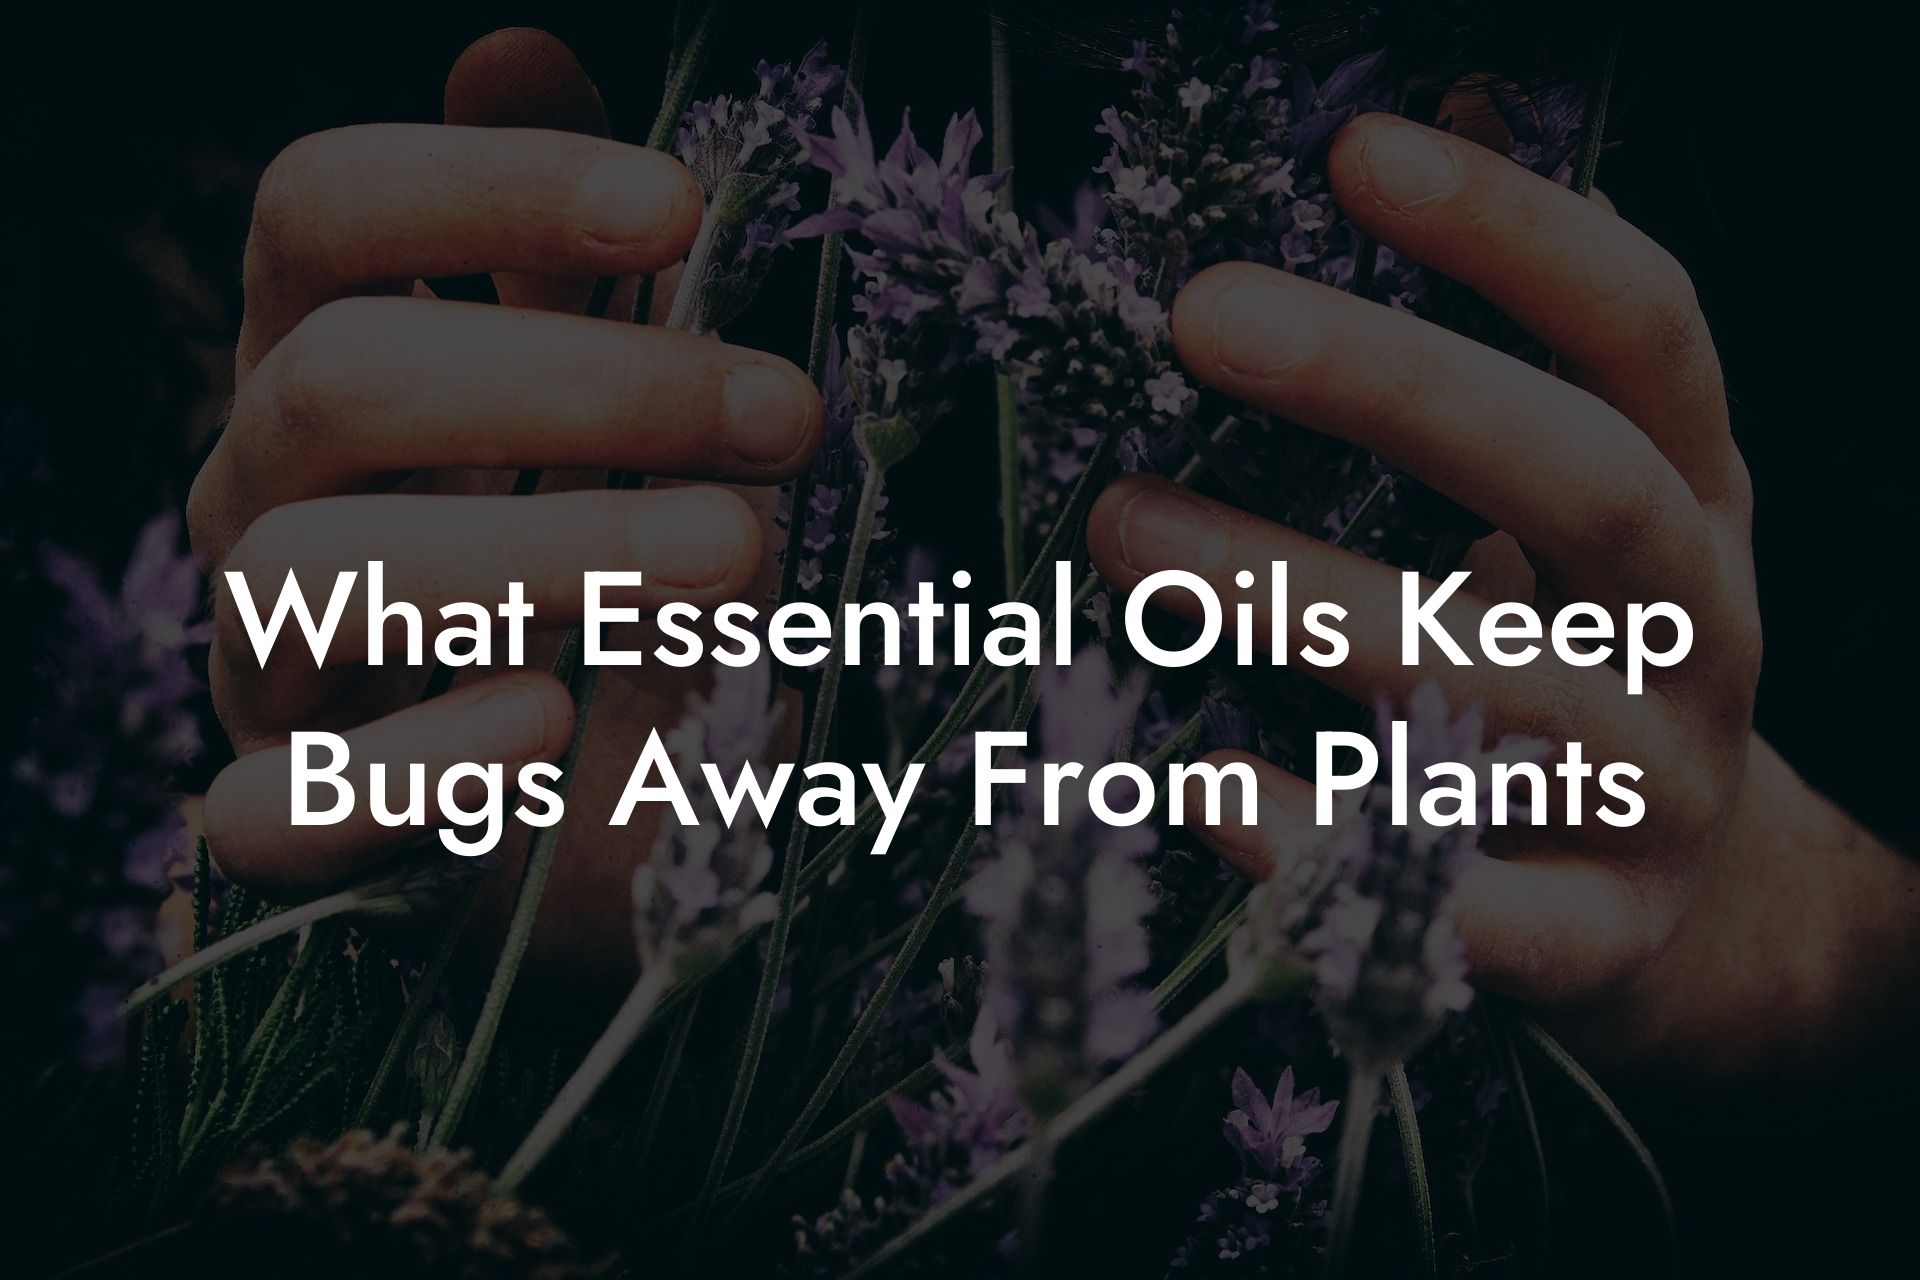 What Essential Oils Keep Bugs Away From Plants